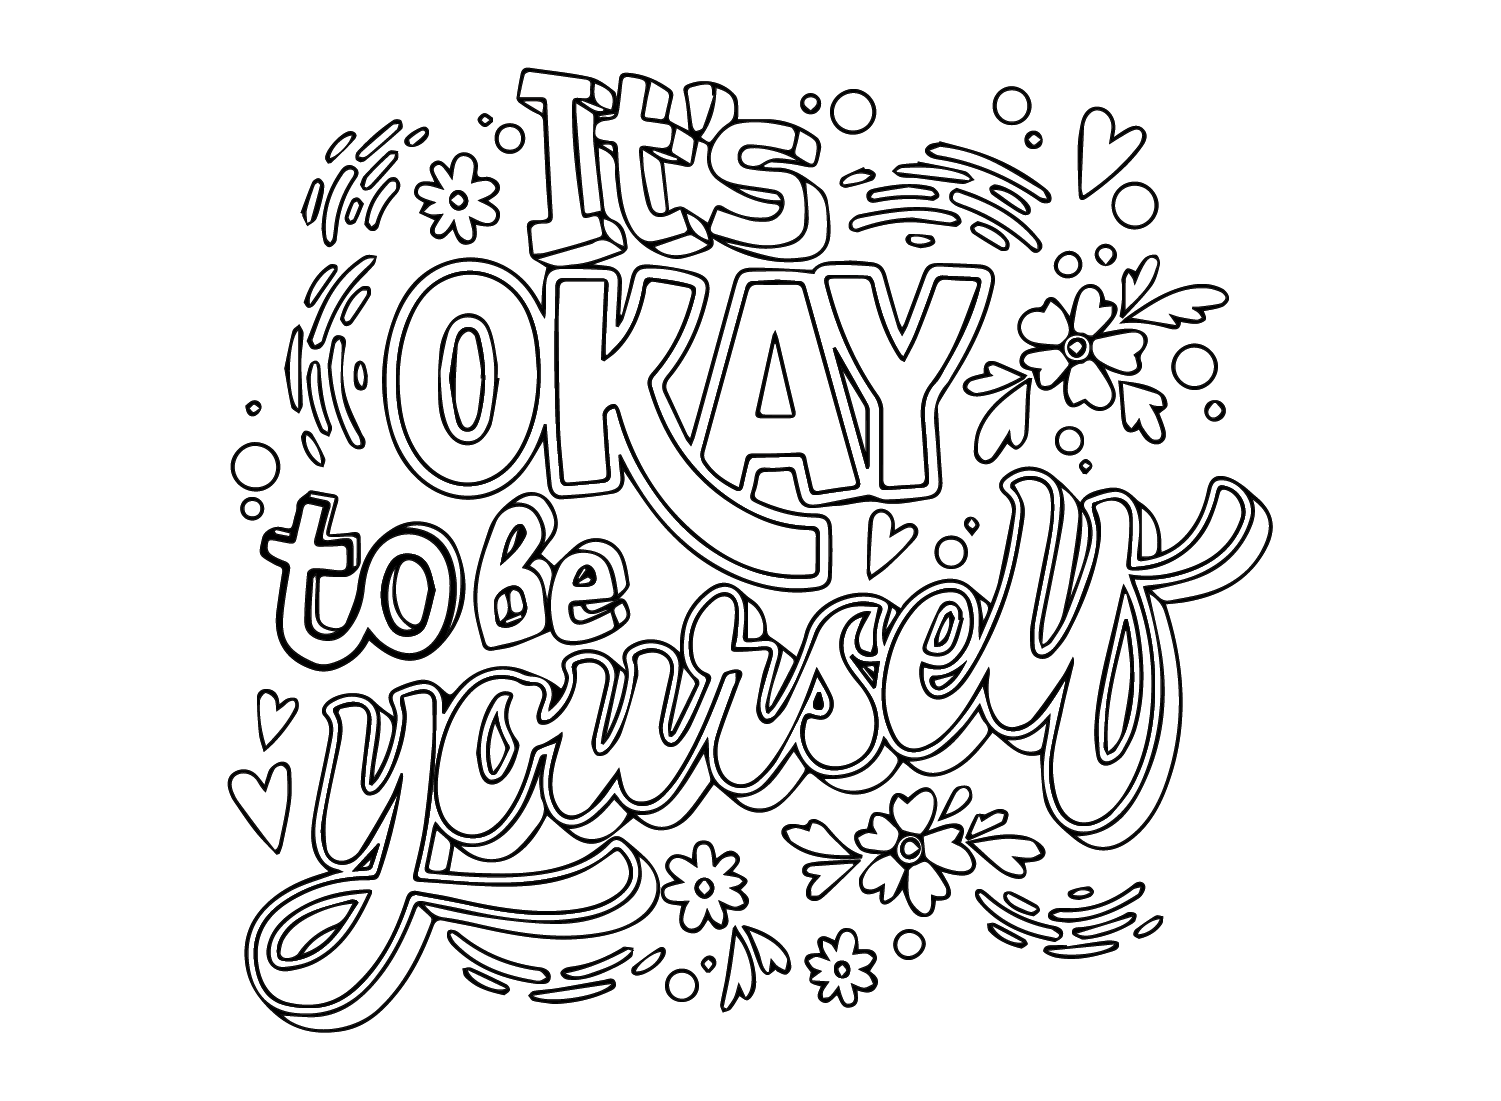 Motivational Quote Coloring Page